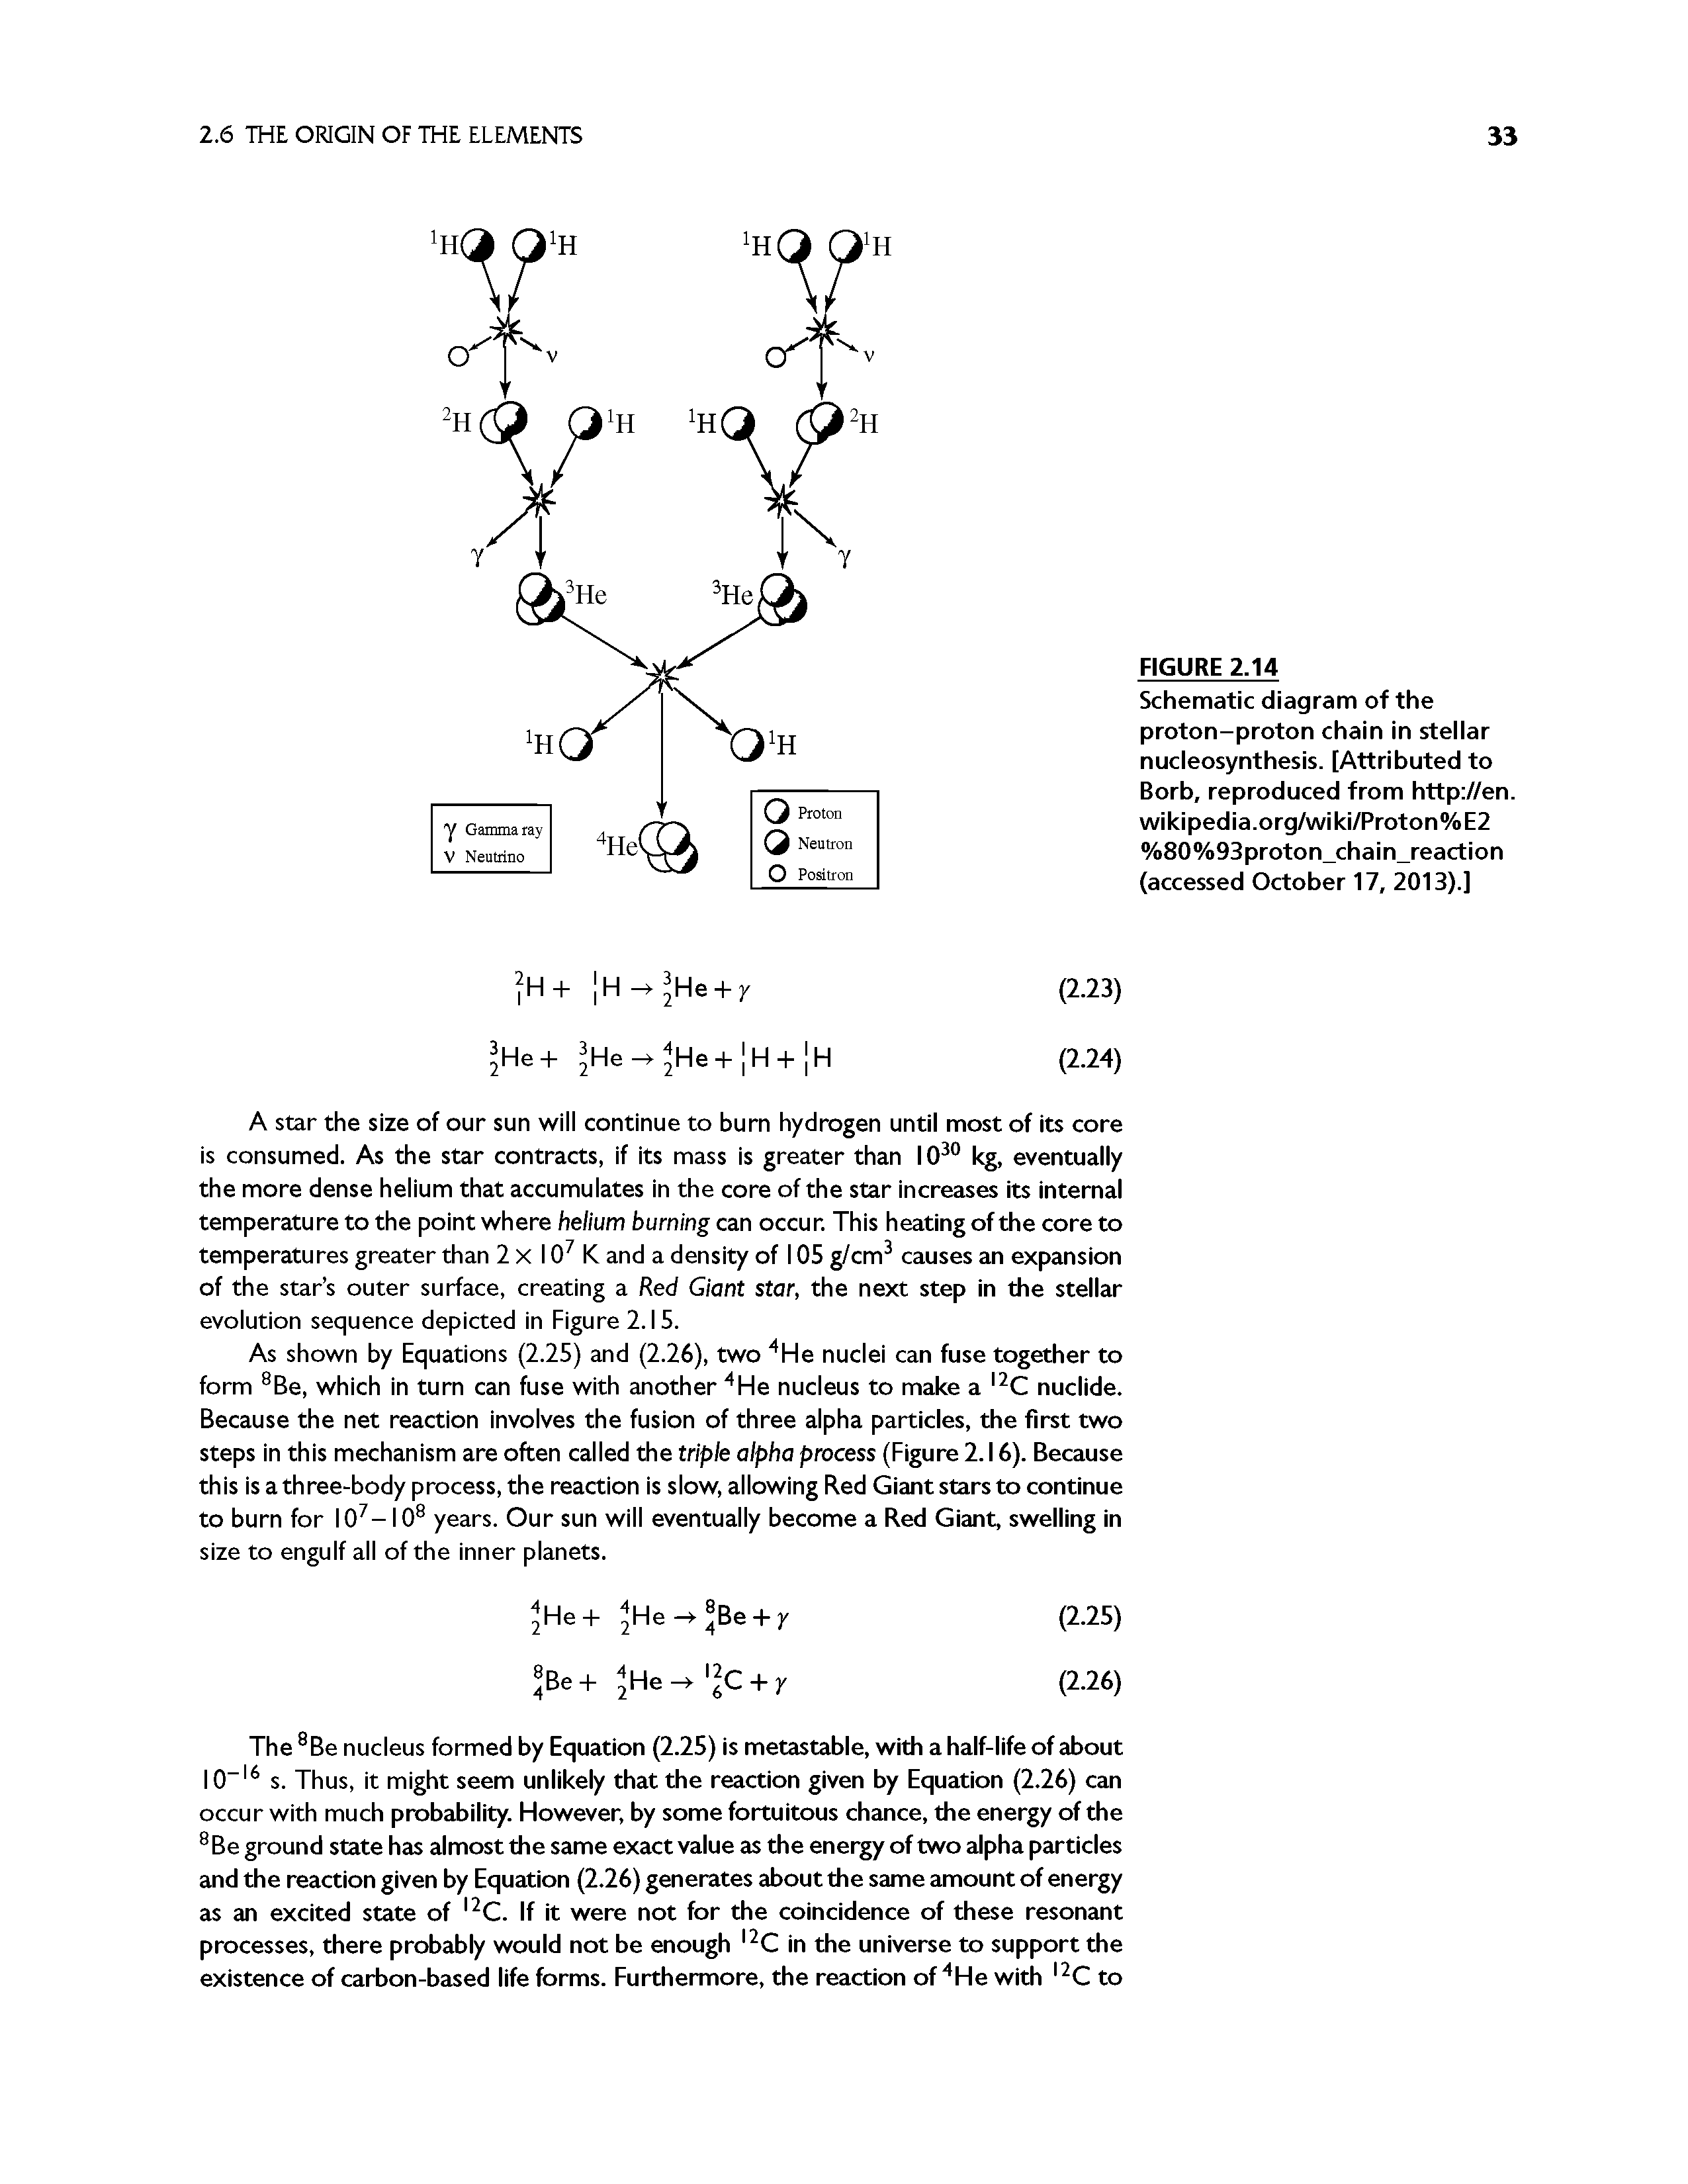 Schematic diagram of the proton-proton chain in stellar nucleosynthesis. [Attributed to Borb, reproduced from http //en. wikipedia.org/wiki/Proton%E2 %80%93proton chain reaction (accessed October 17, 2013).]...